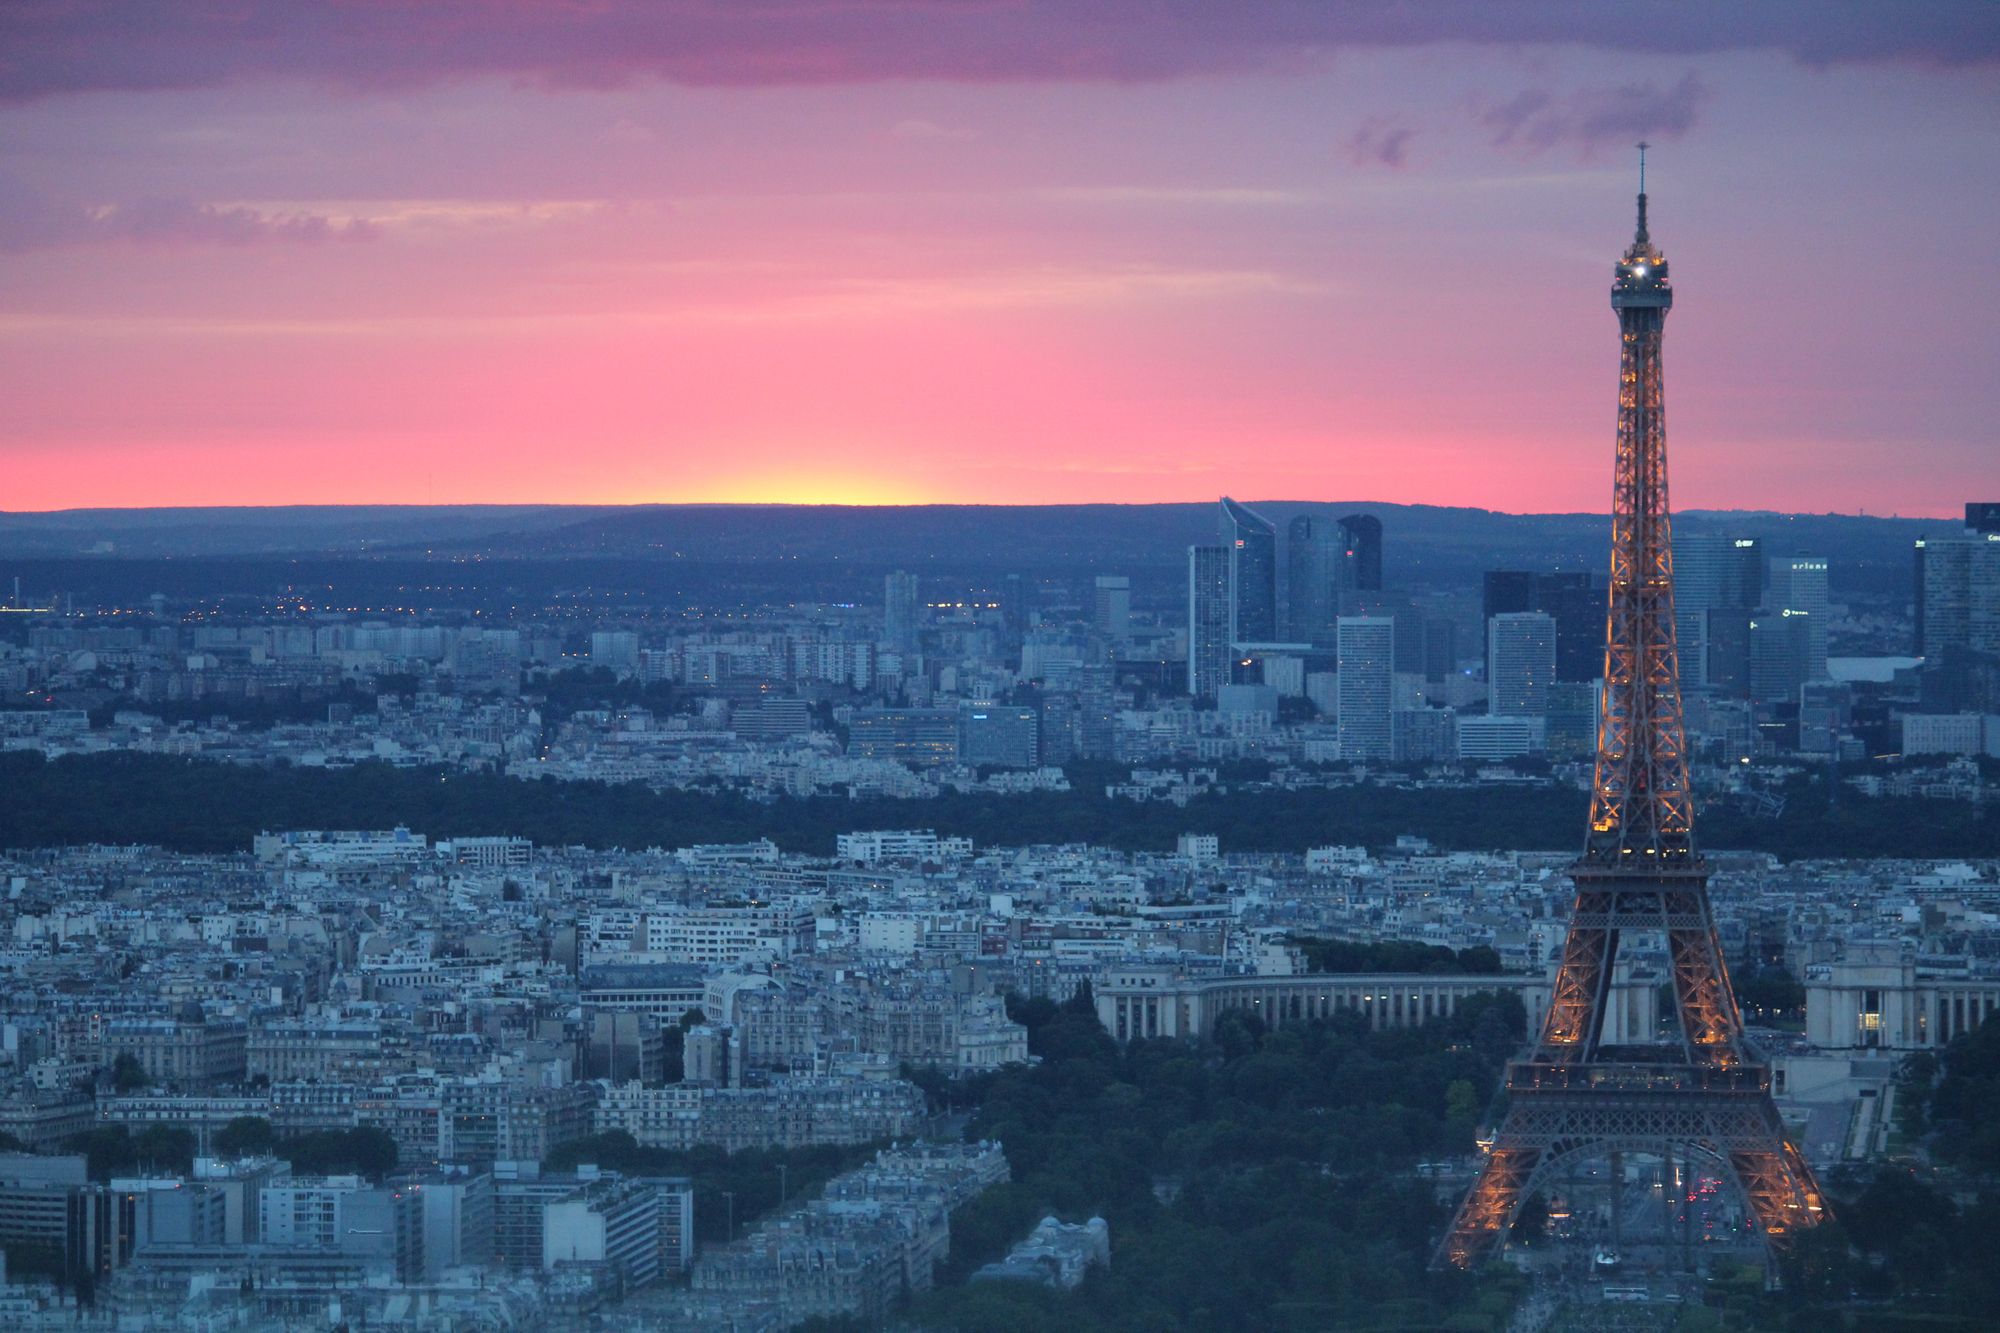 Five Reasons to Visit the Eiffel Tower